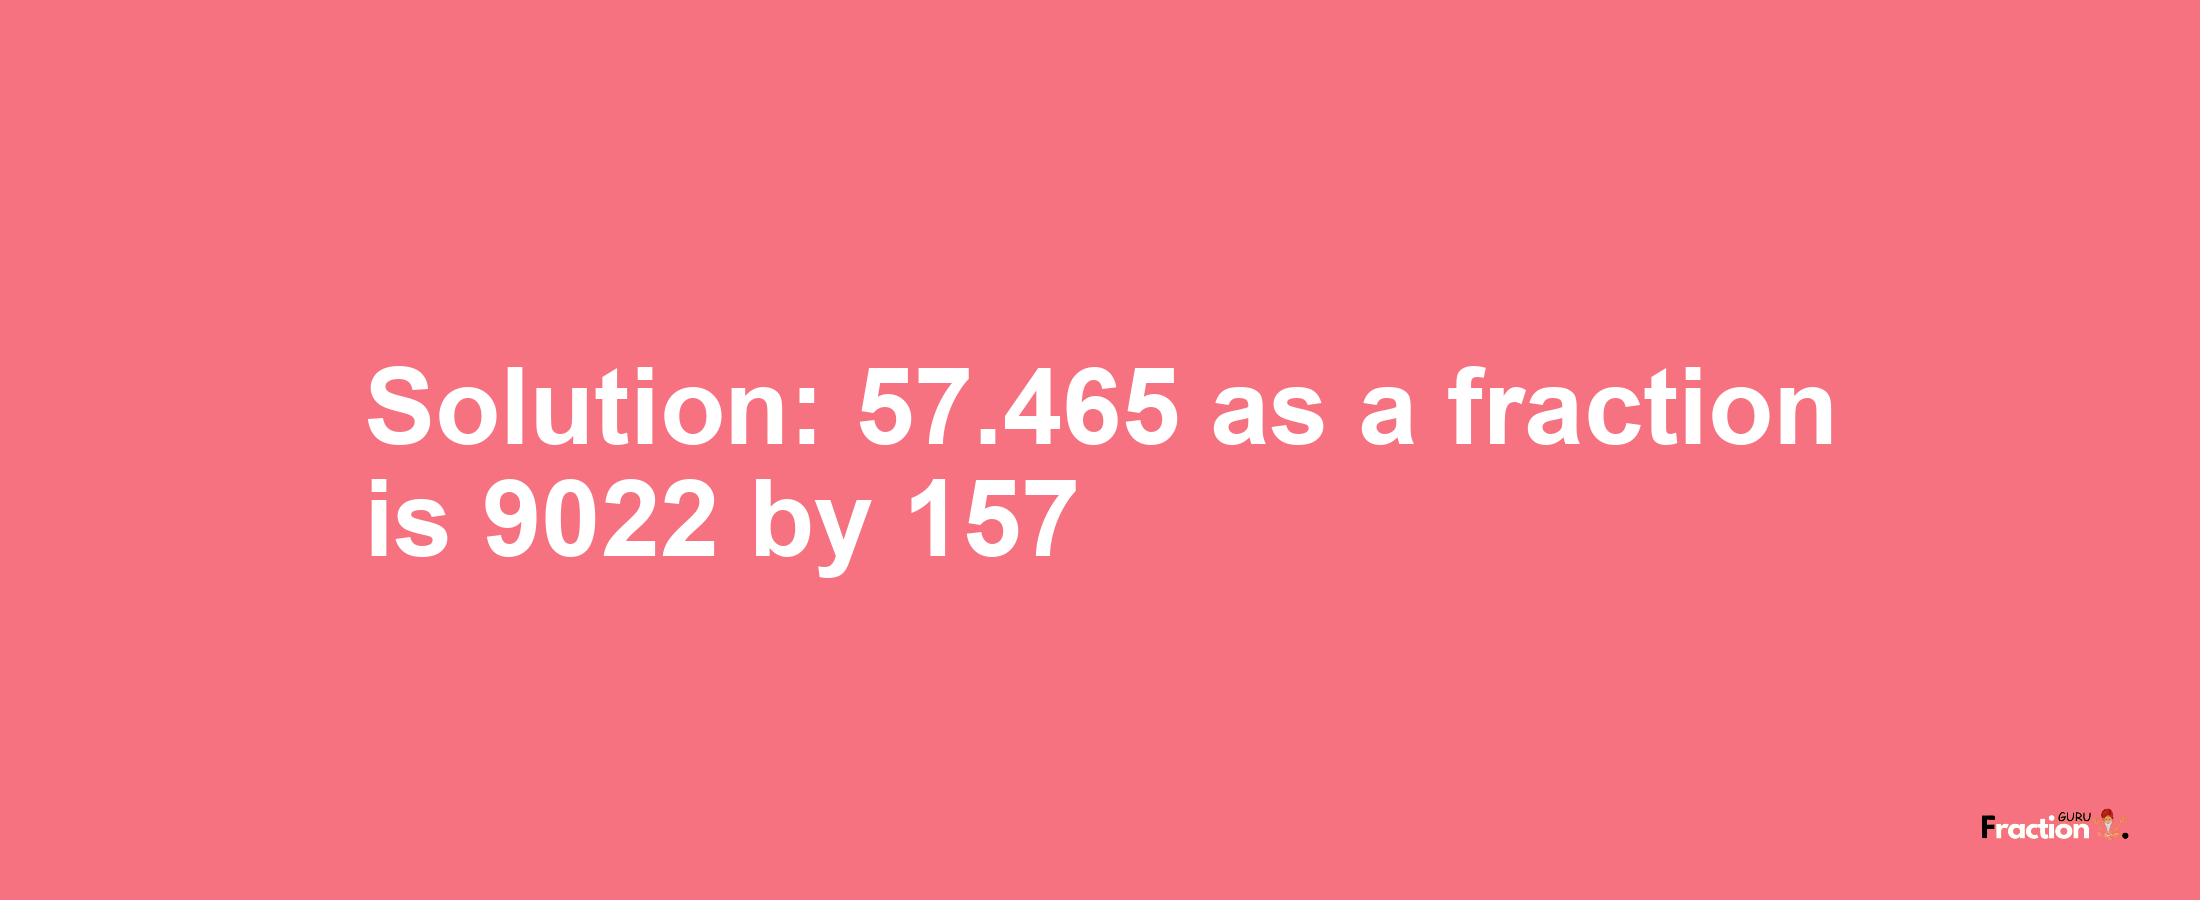 Solution:57.465 as a fraction is 9022/157